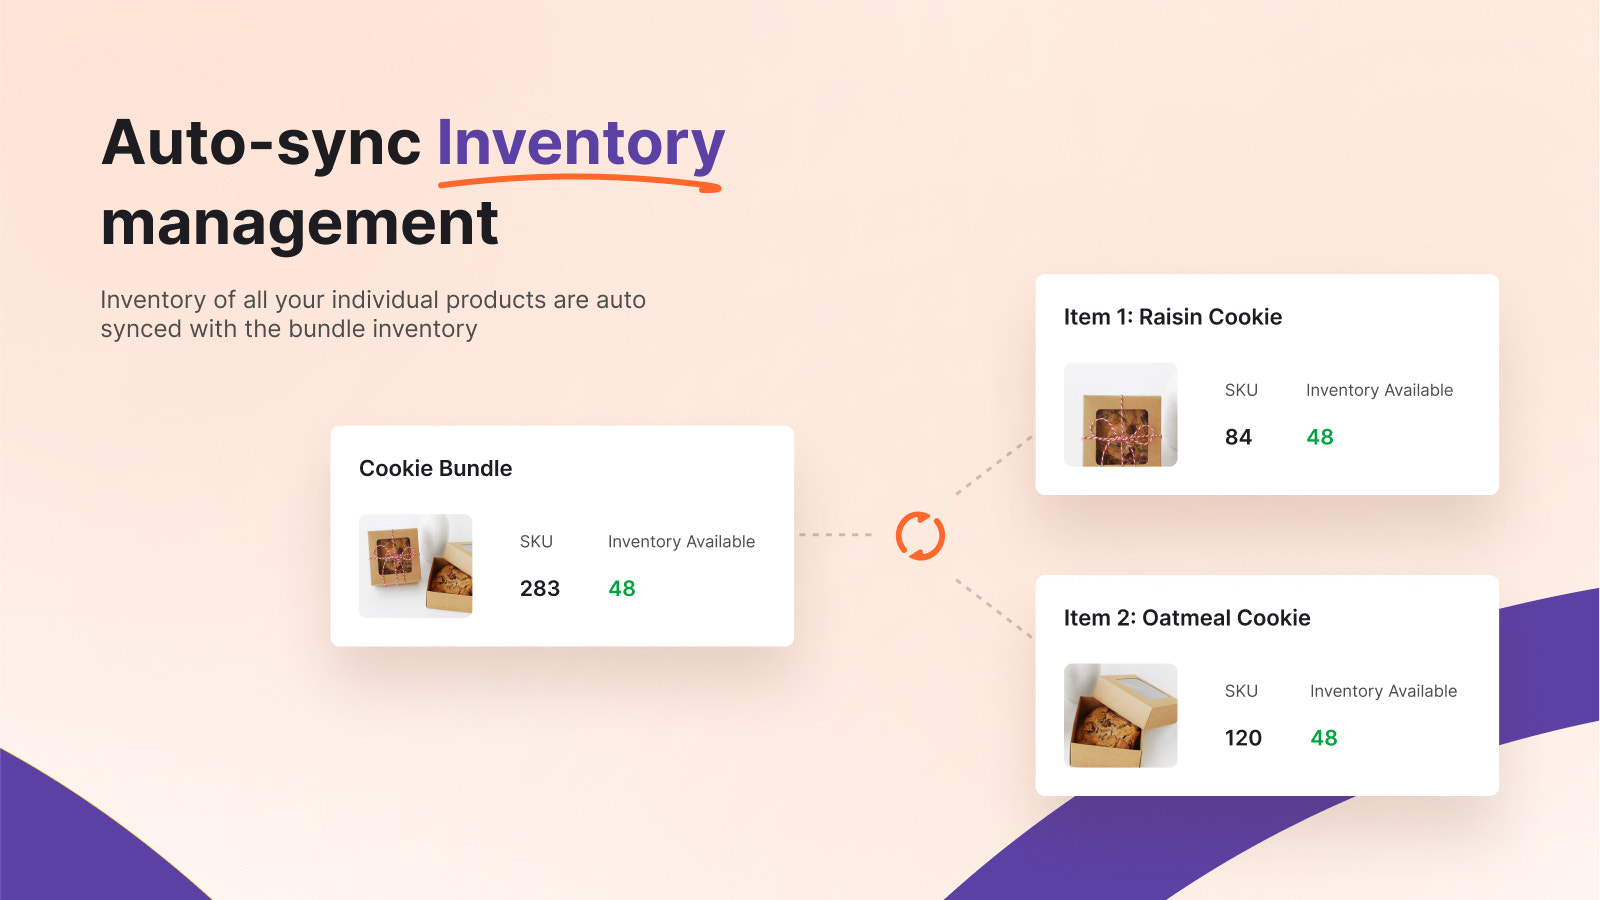 Inventory management made easy by our auto-sync functionality